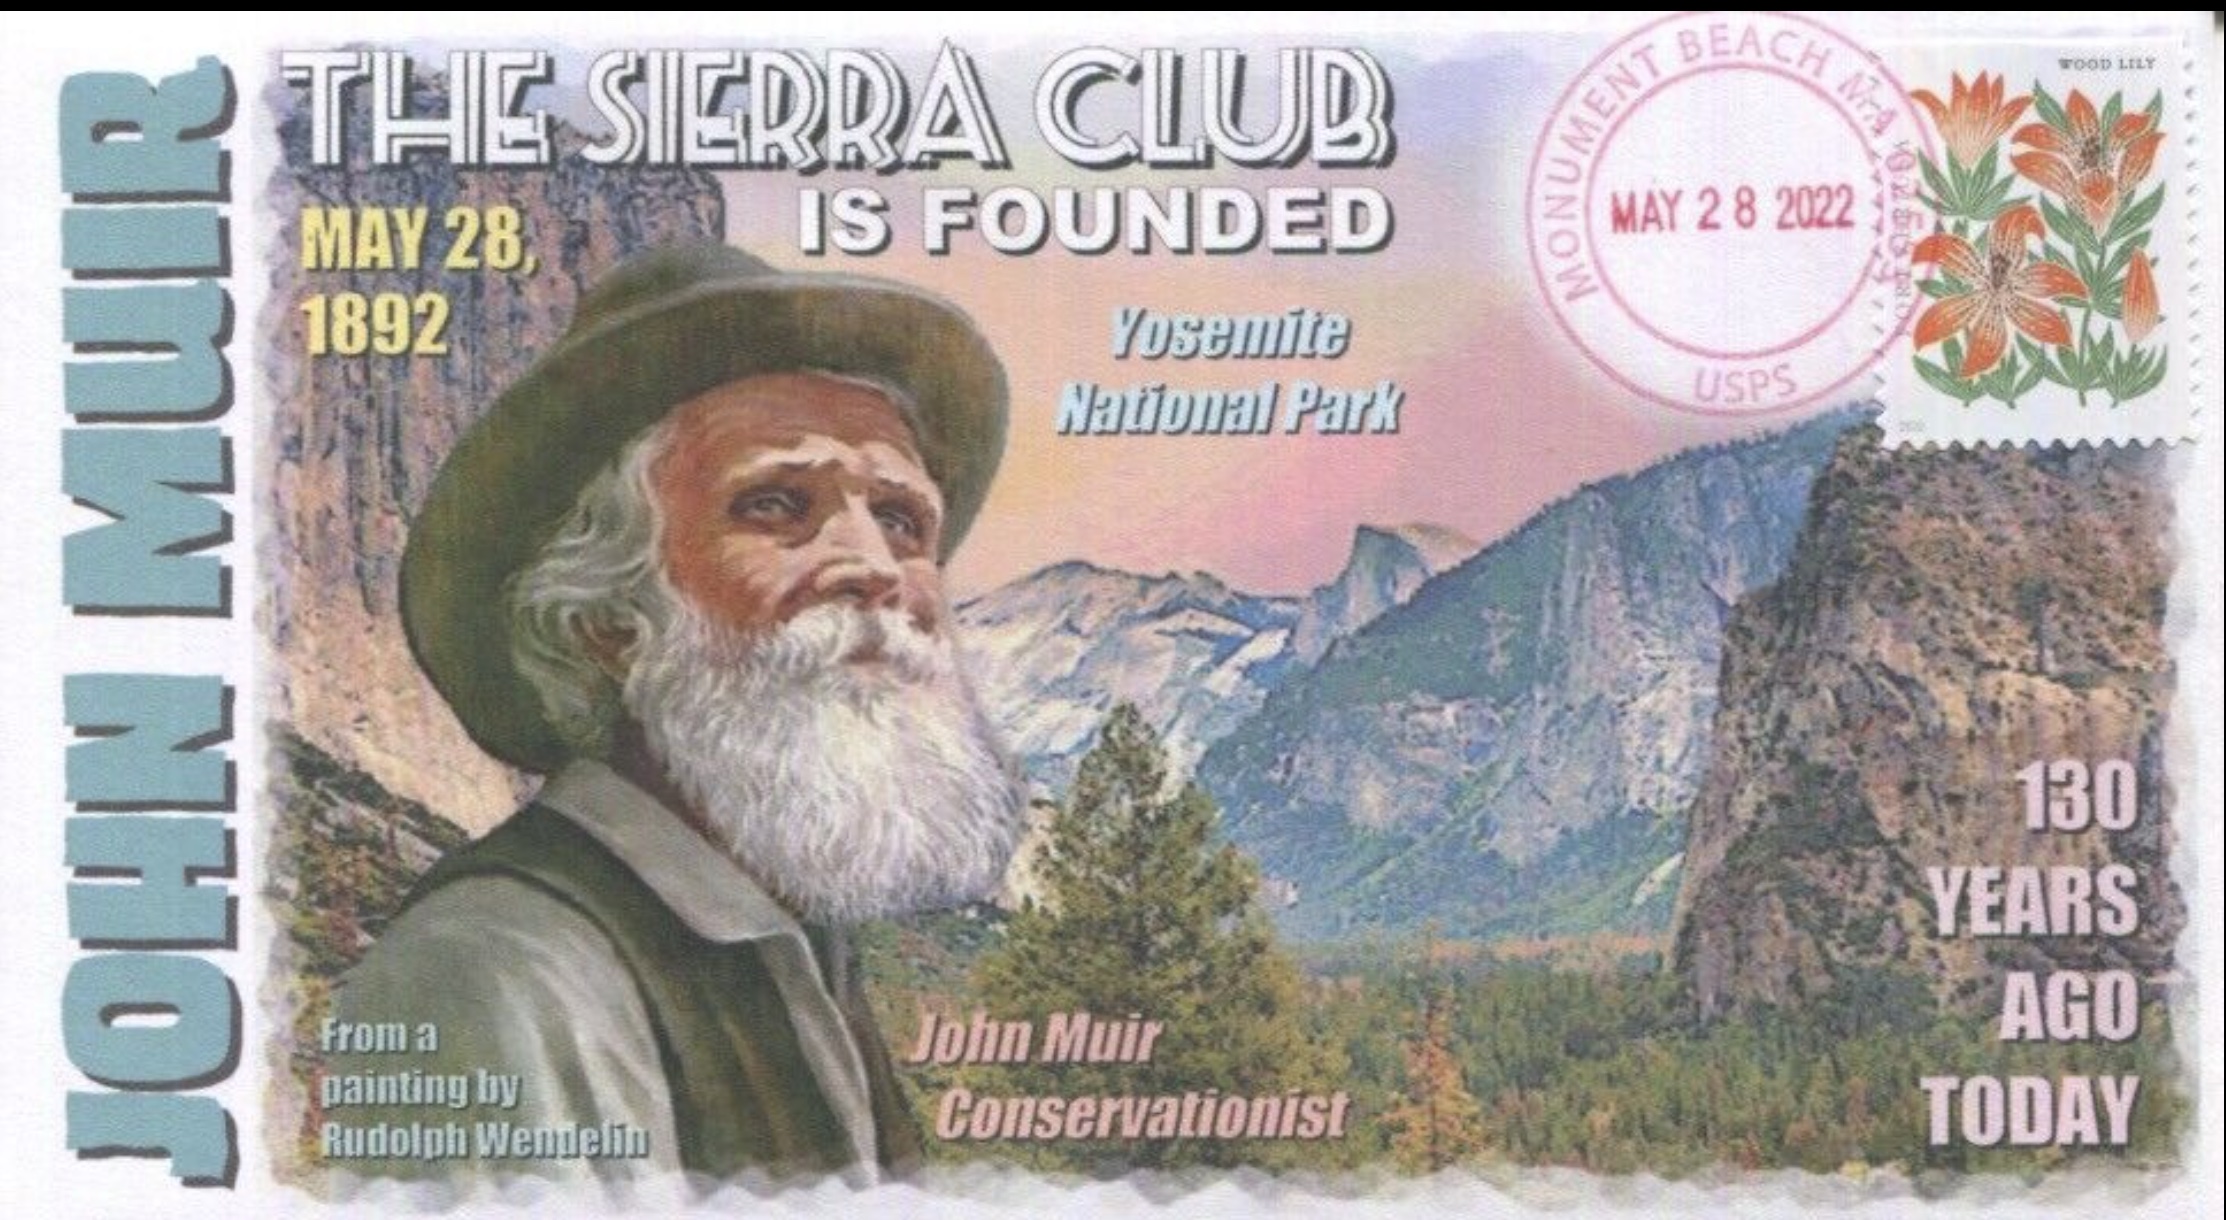 2022 John Muir and Yossemite Cachet by Coverscape in recognition of Founding of the Sierra Club on may 28, 1892